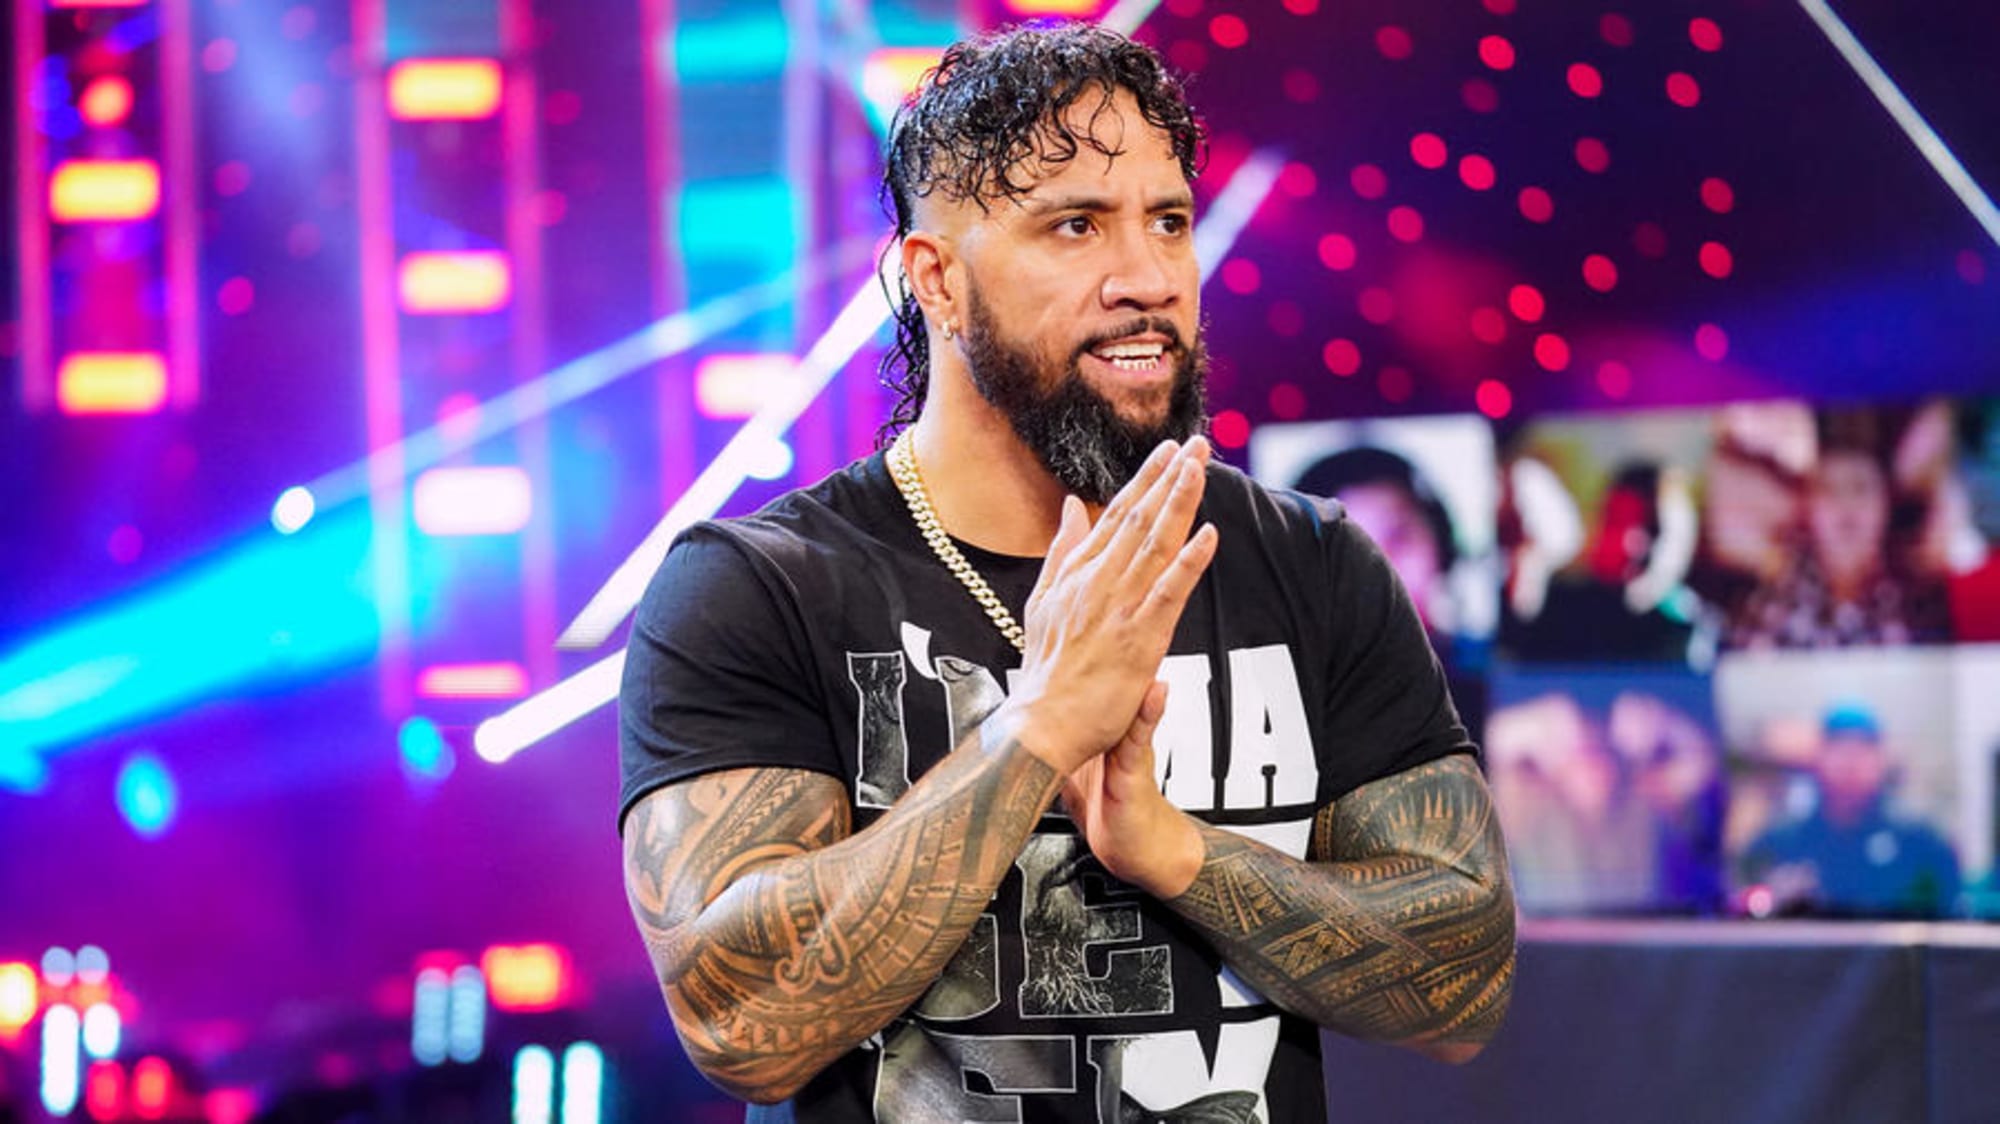 Jey Uso will get his win over Roman Reigns postWrestleMania